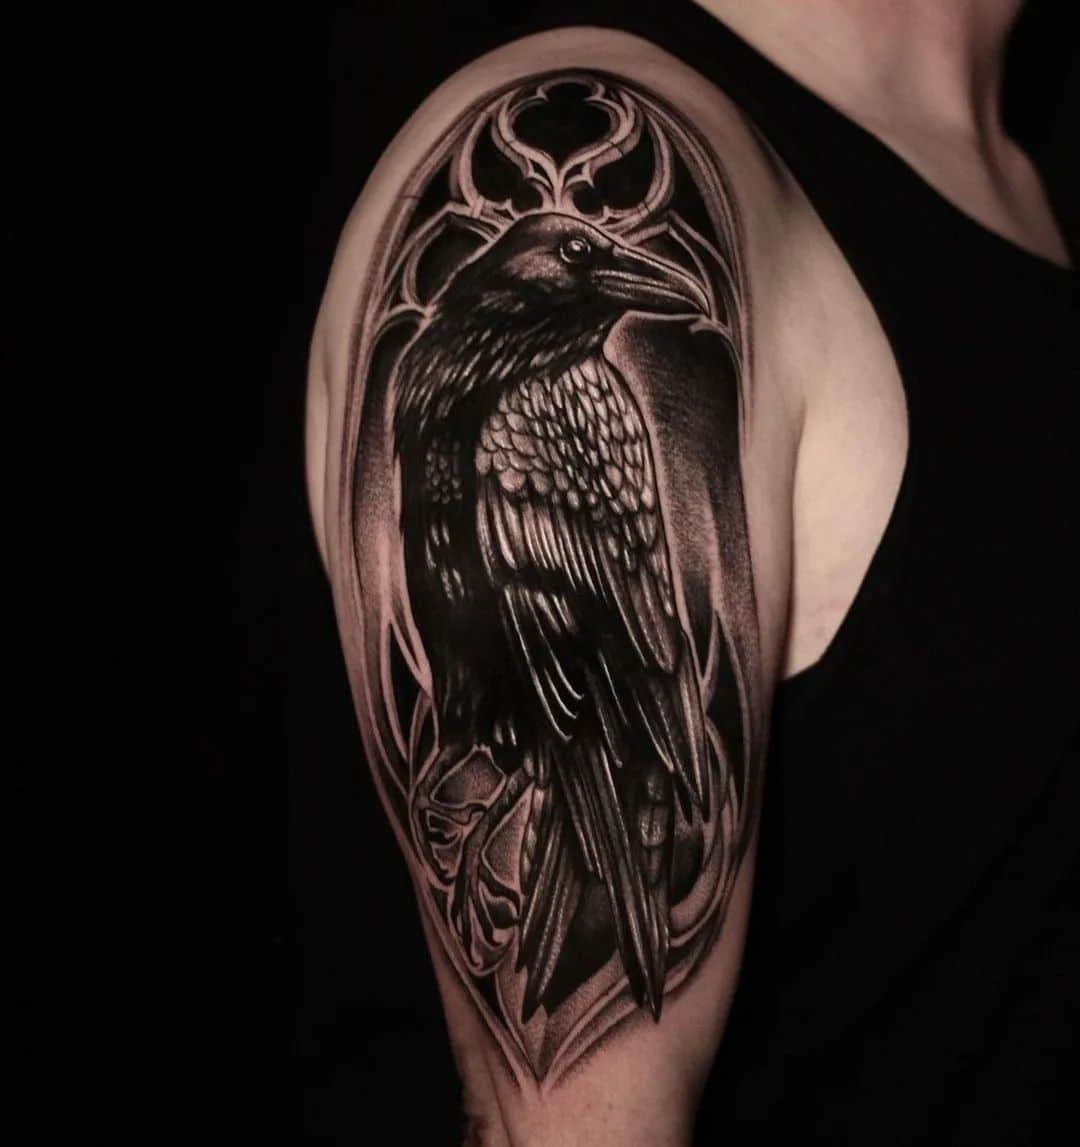 A cover up with a crow for David, tattoo by Liz!
lizminellitattoo 

                   